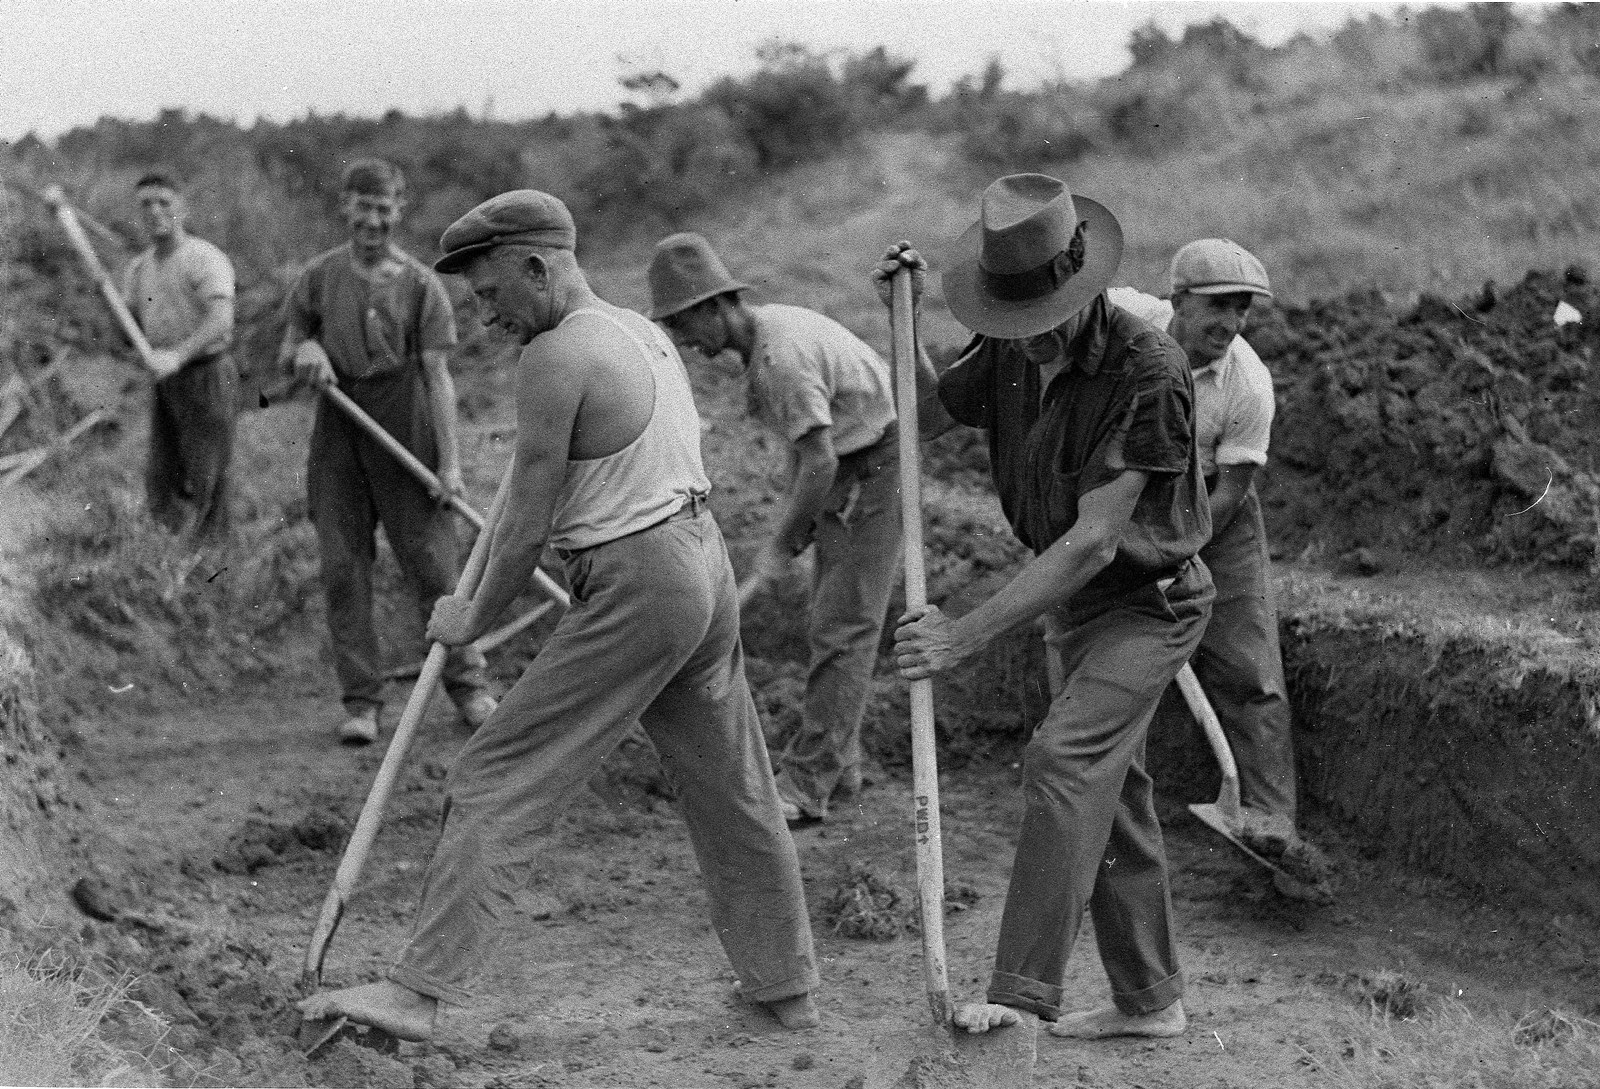 Black and white photo of men with digging equipment working outdoors.